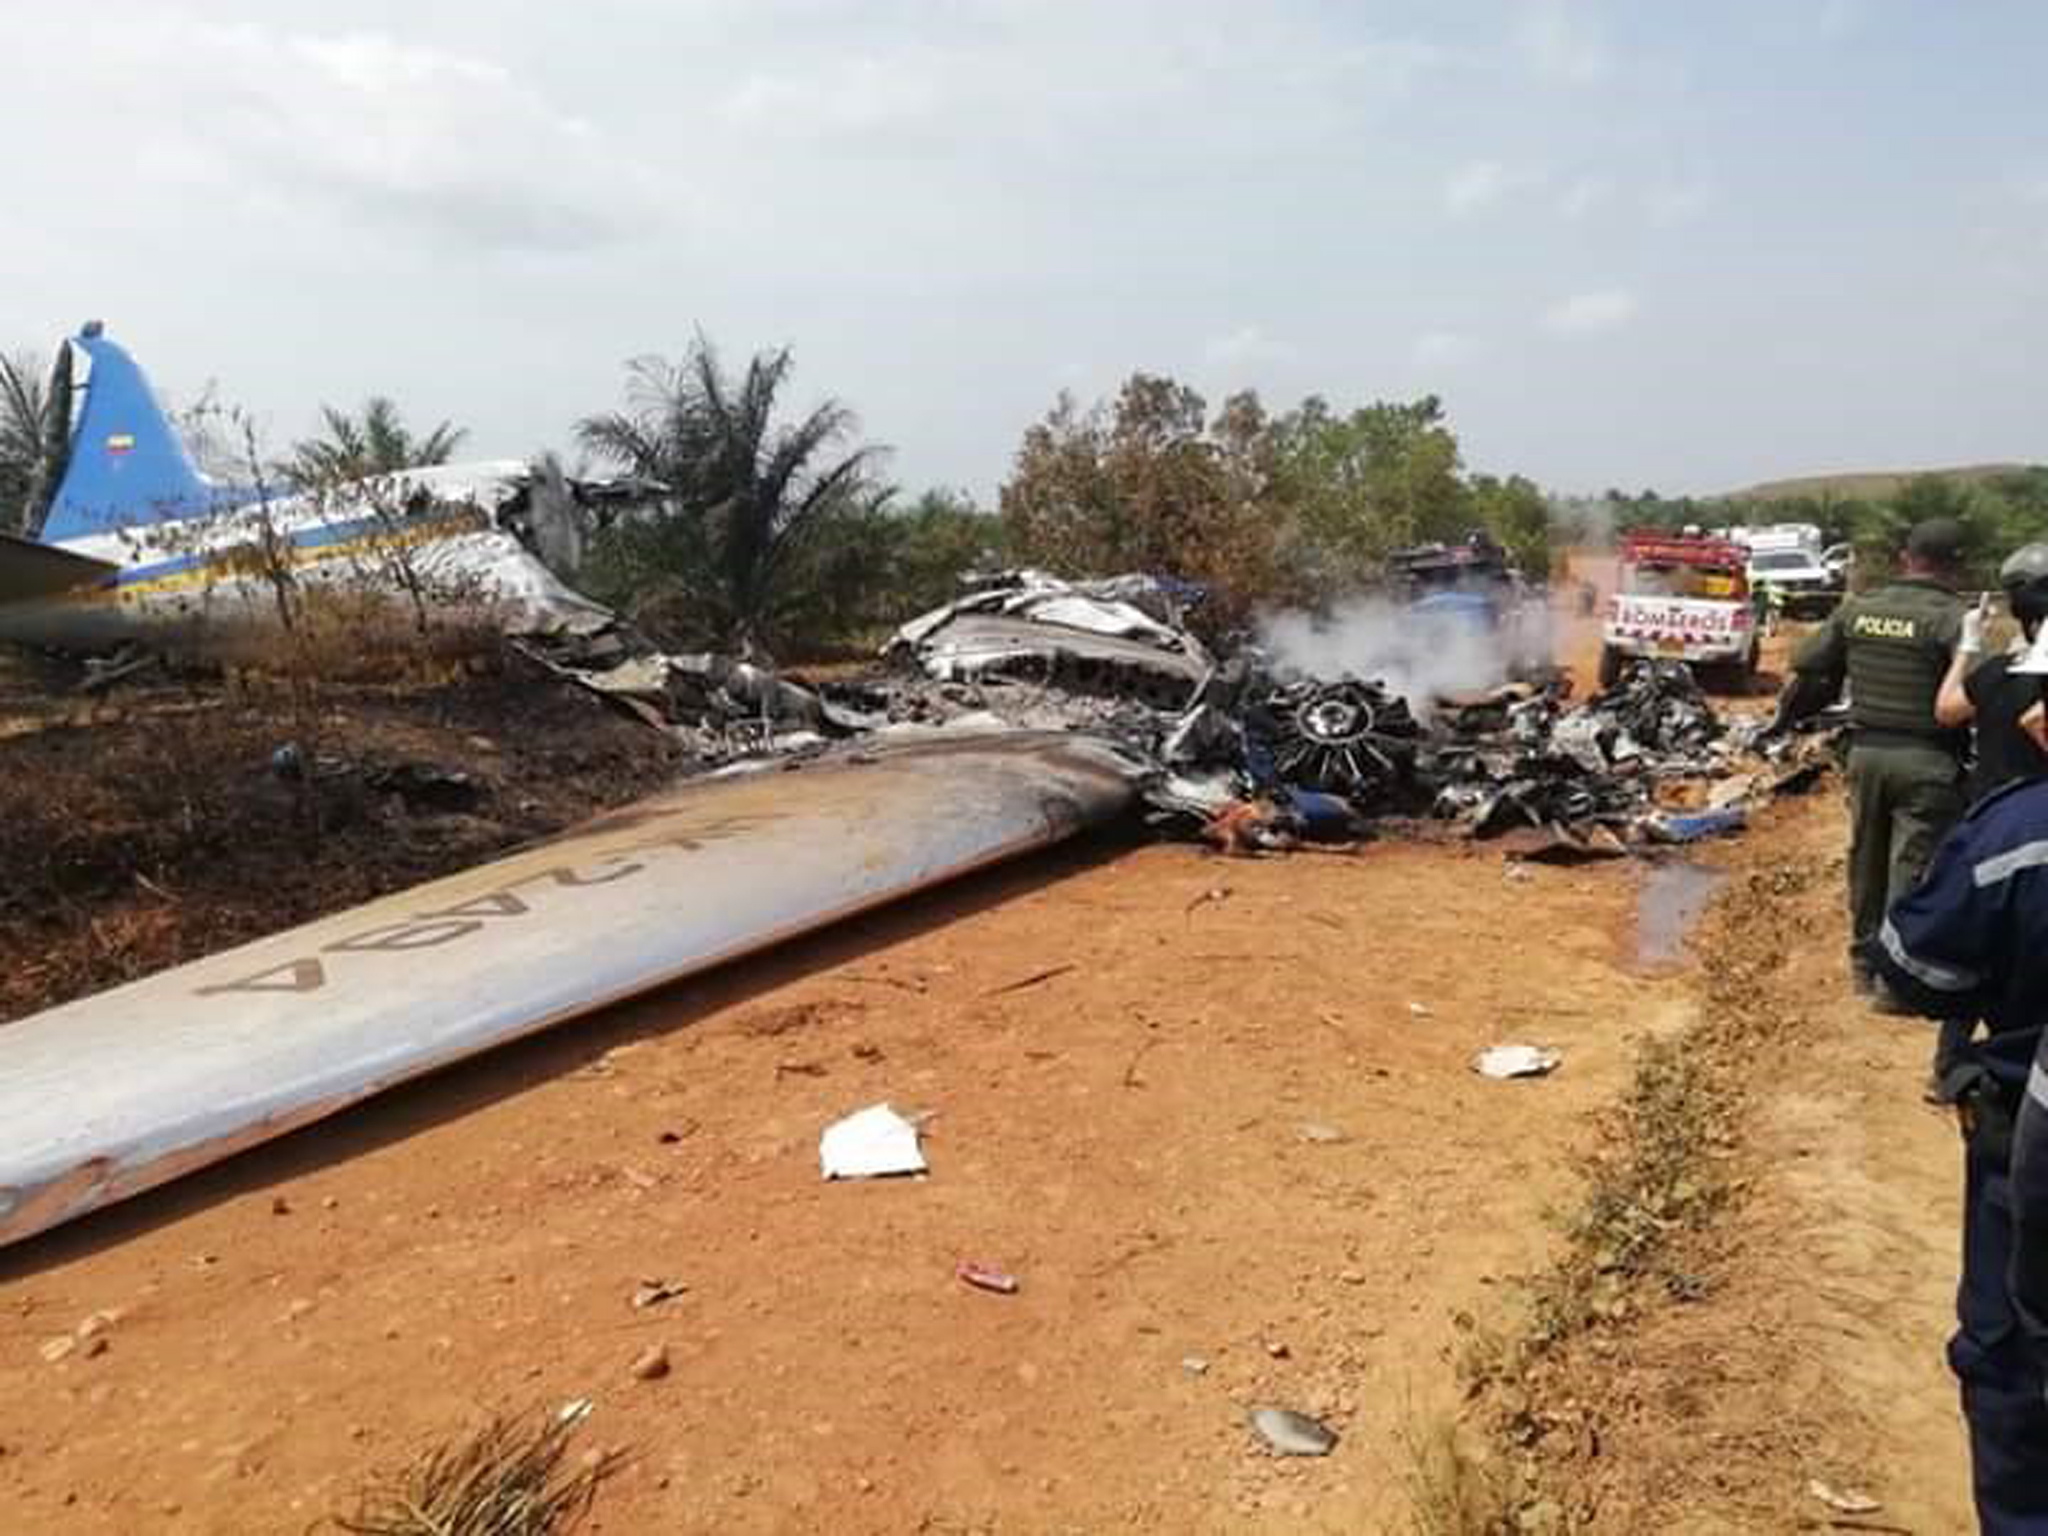 epa07426156 A handout photo made available by the Defensa Civil Colombiana shows the scene of an airplane accident in the village of La Bendicion, municipality of San Martin, Meta, Colombia, 09 March 2019. At least 14 people, including a minor, died when a DC-3 plane of the Laser airline crashed in a jungle area of the Colombian department of Meta.  EPA/DEFENSA CIVIL COLOMBIANA HANDOUT BEST QUALITY AVAILABLE HANDOUT EDITORIAL USE ONLY/NO SALES